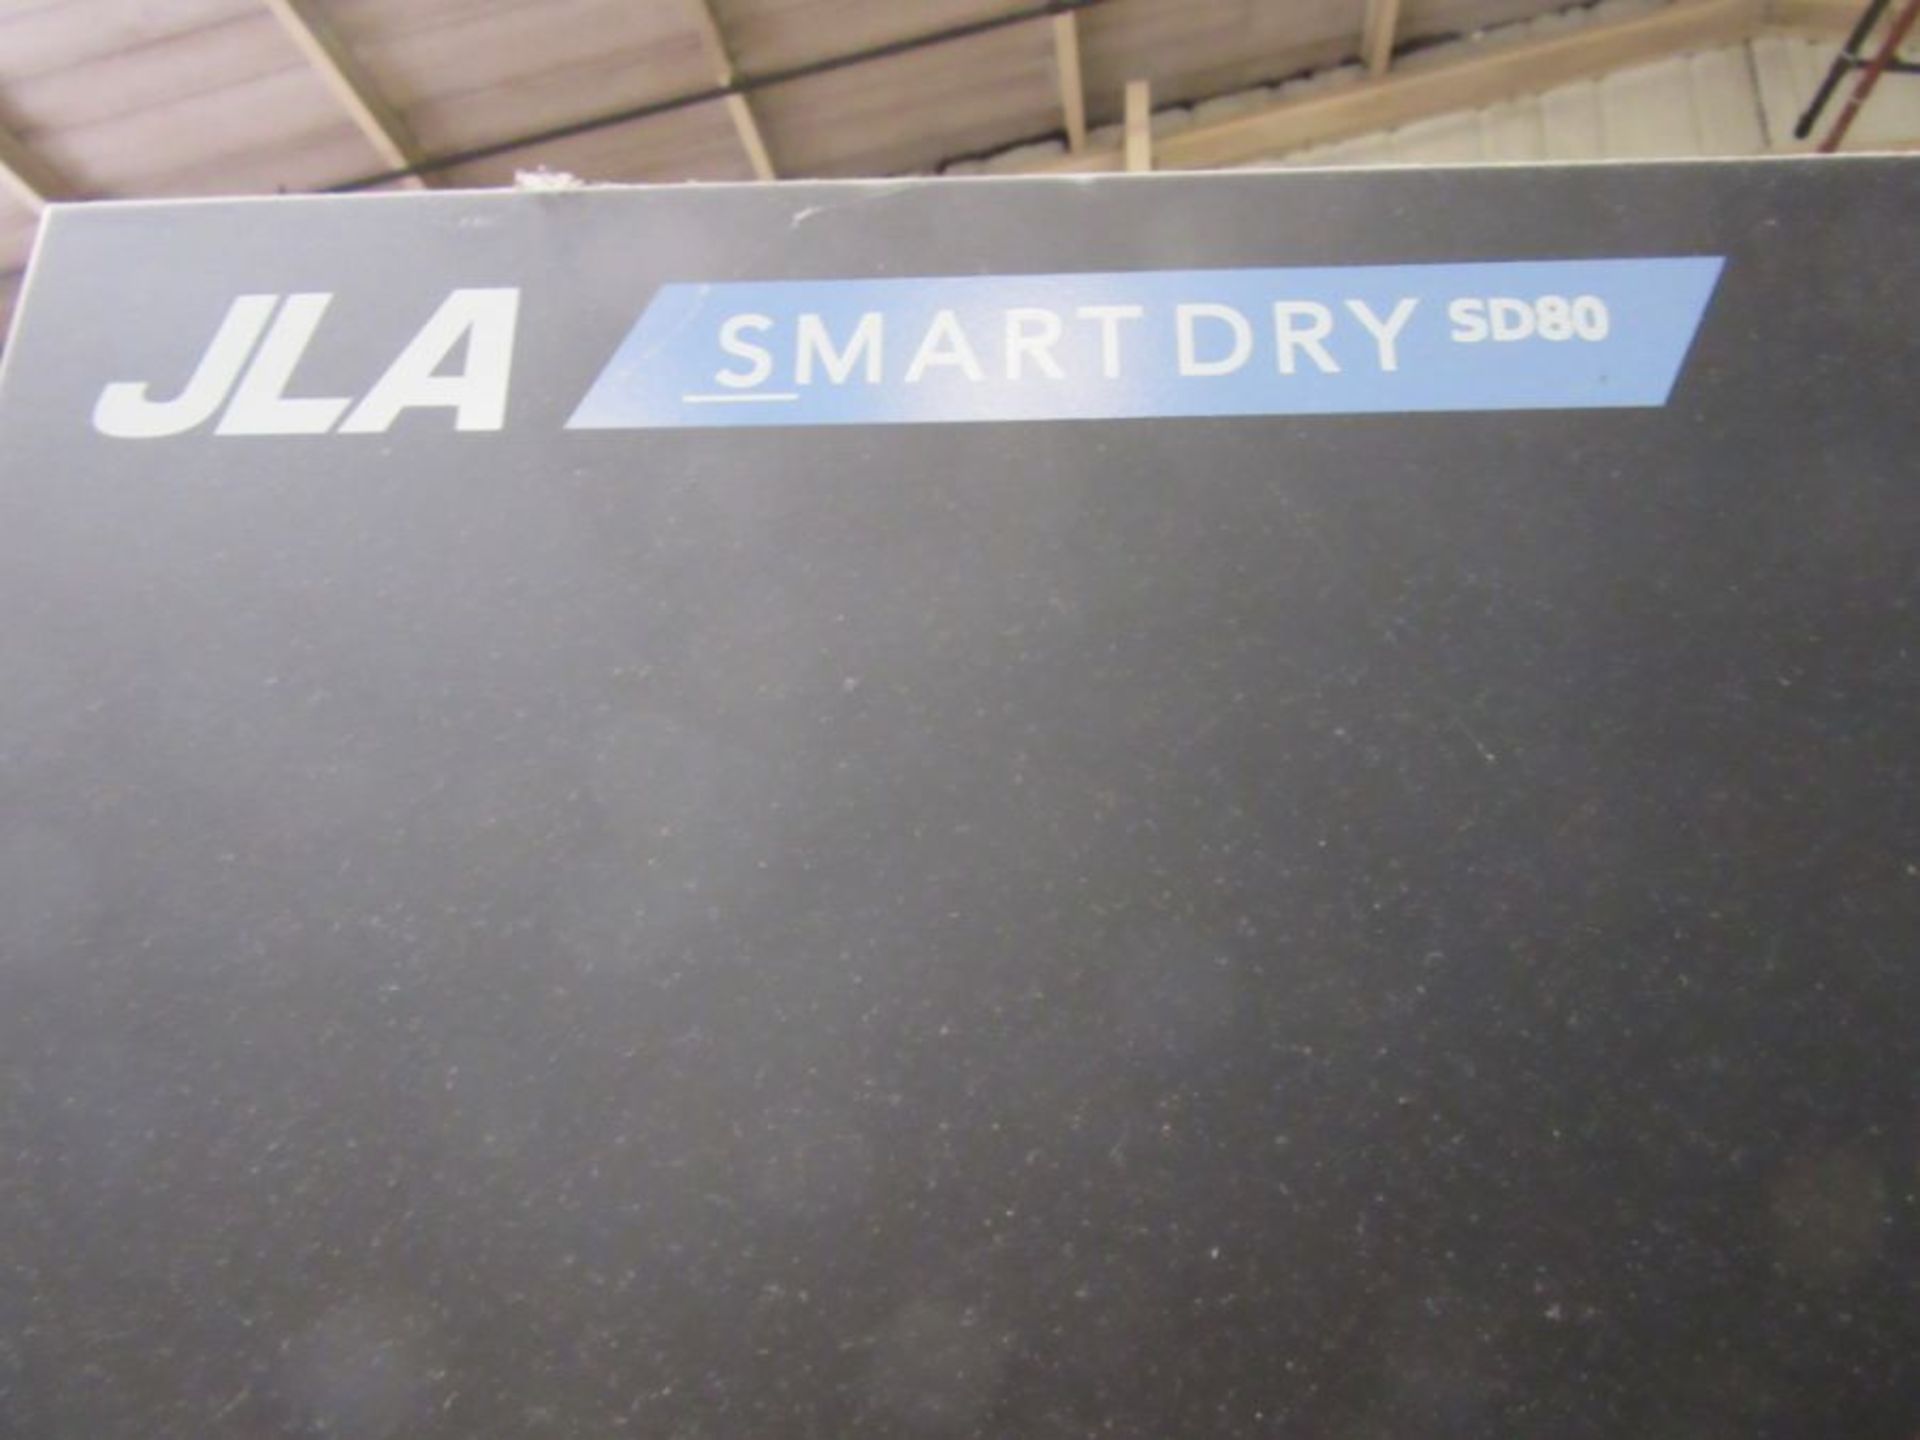 A JLA Smart Dry SD80 industrial/commercial tumble dryer - Image 2 of 4